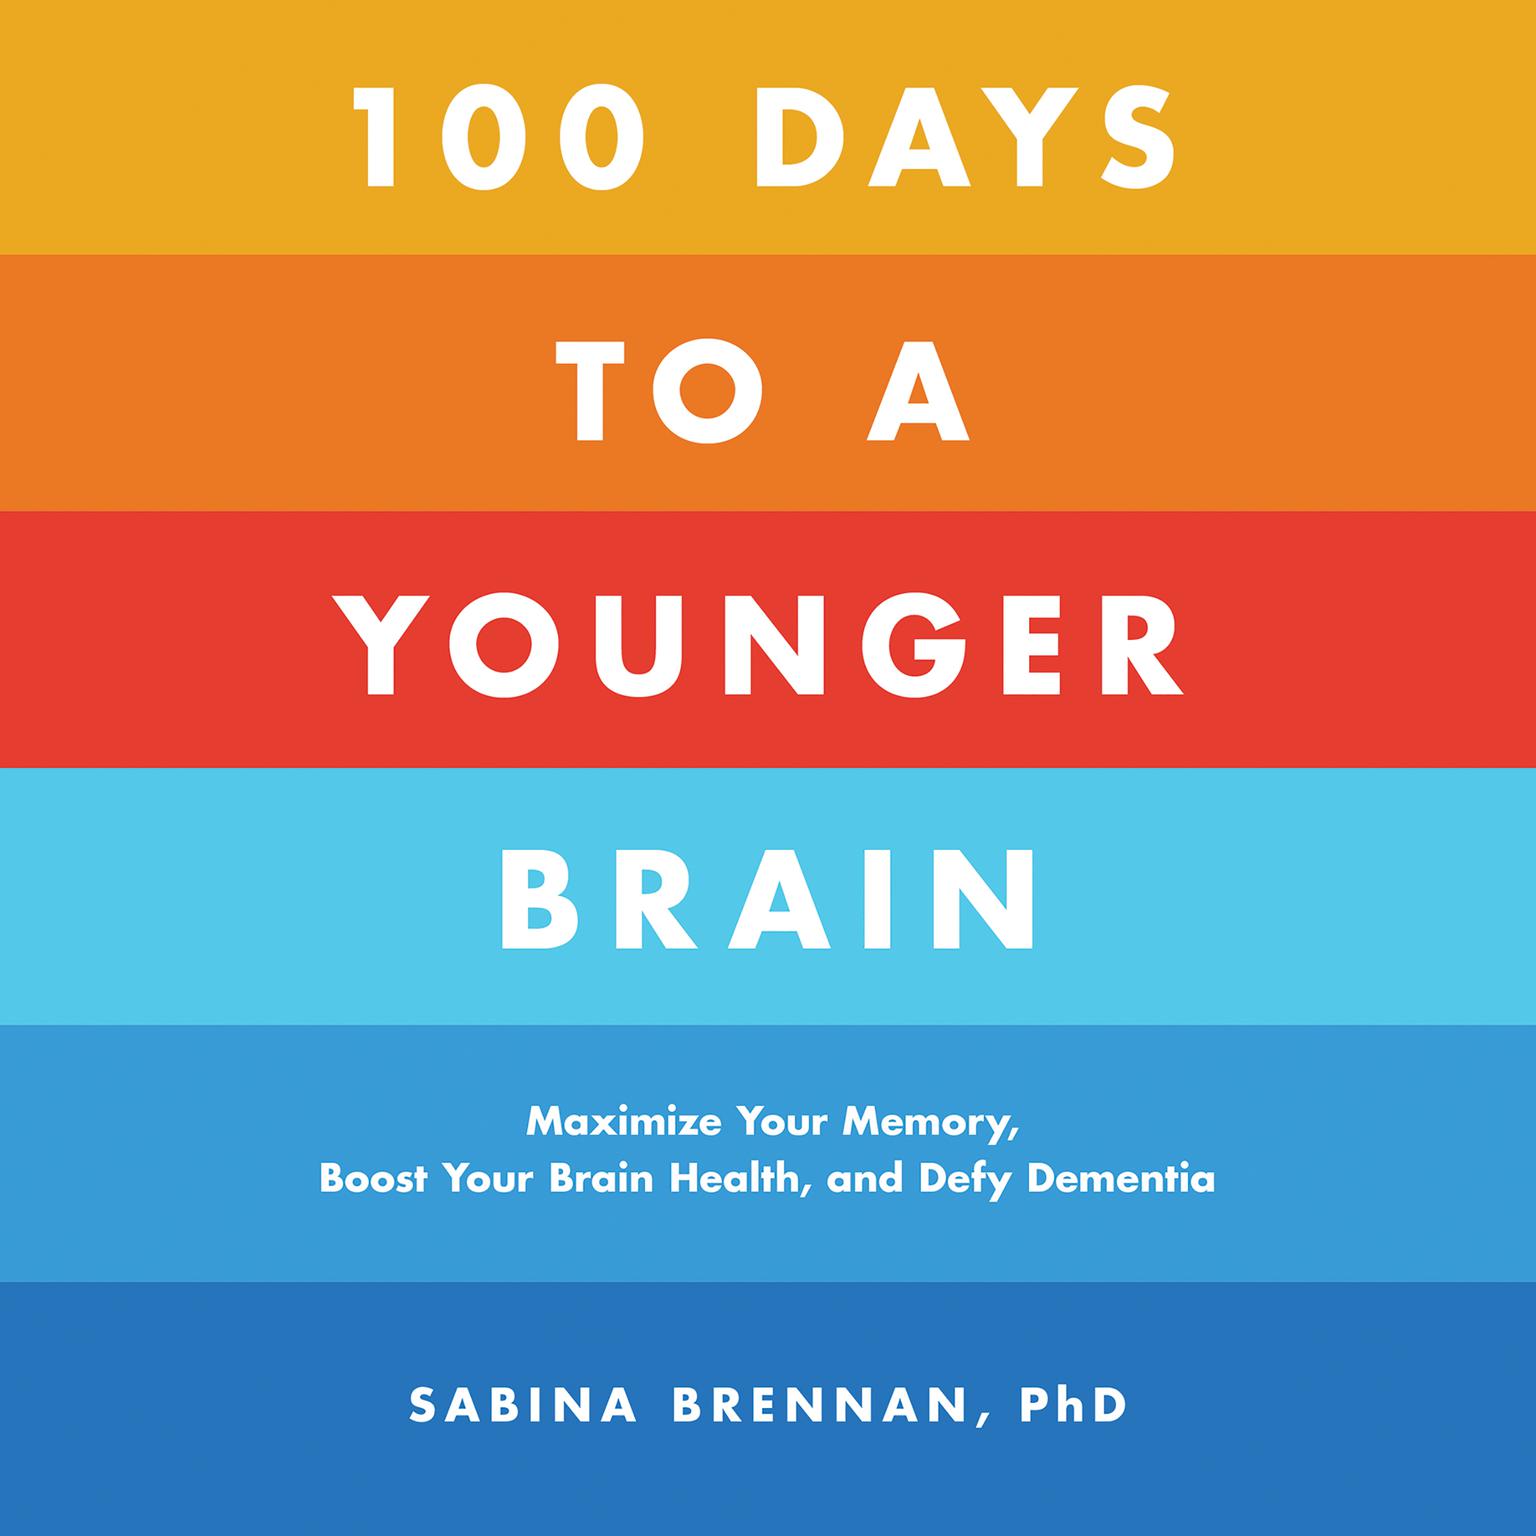 100 Days to a Younger Brain: Maximize Your Memory, Boost Your Brain Health, and Defy Dementia Audiobook, by Sabina Brennan